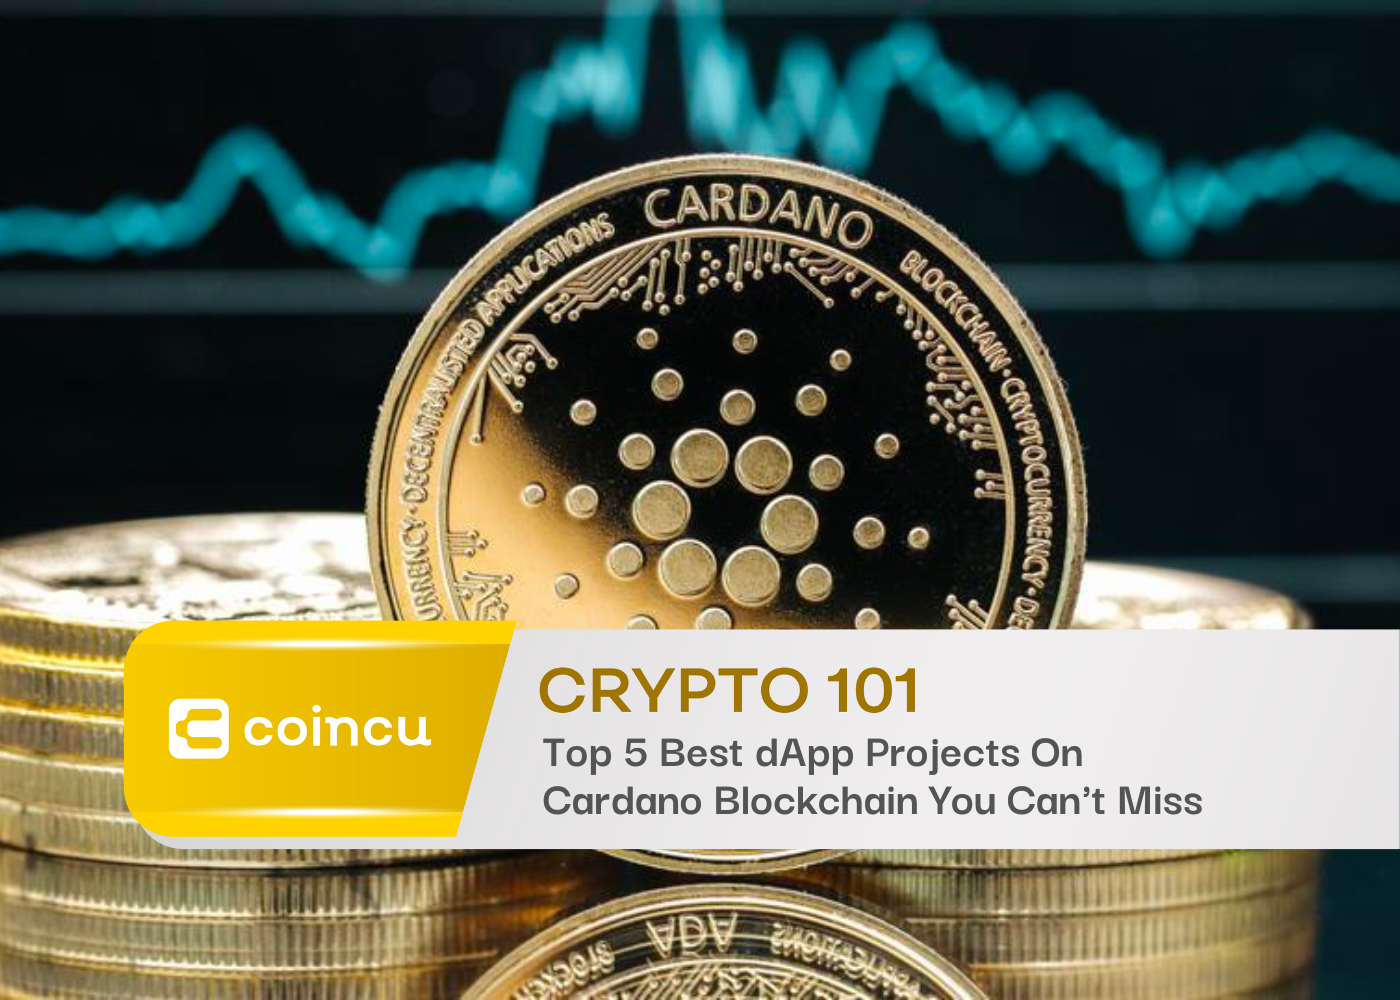 Top 5 Best dApp Projects On Cardano Blockchain You Can't Miss